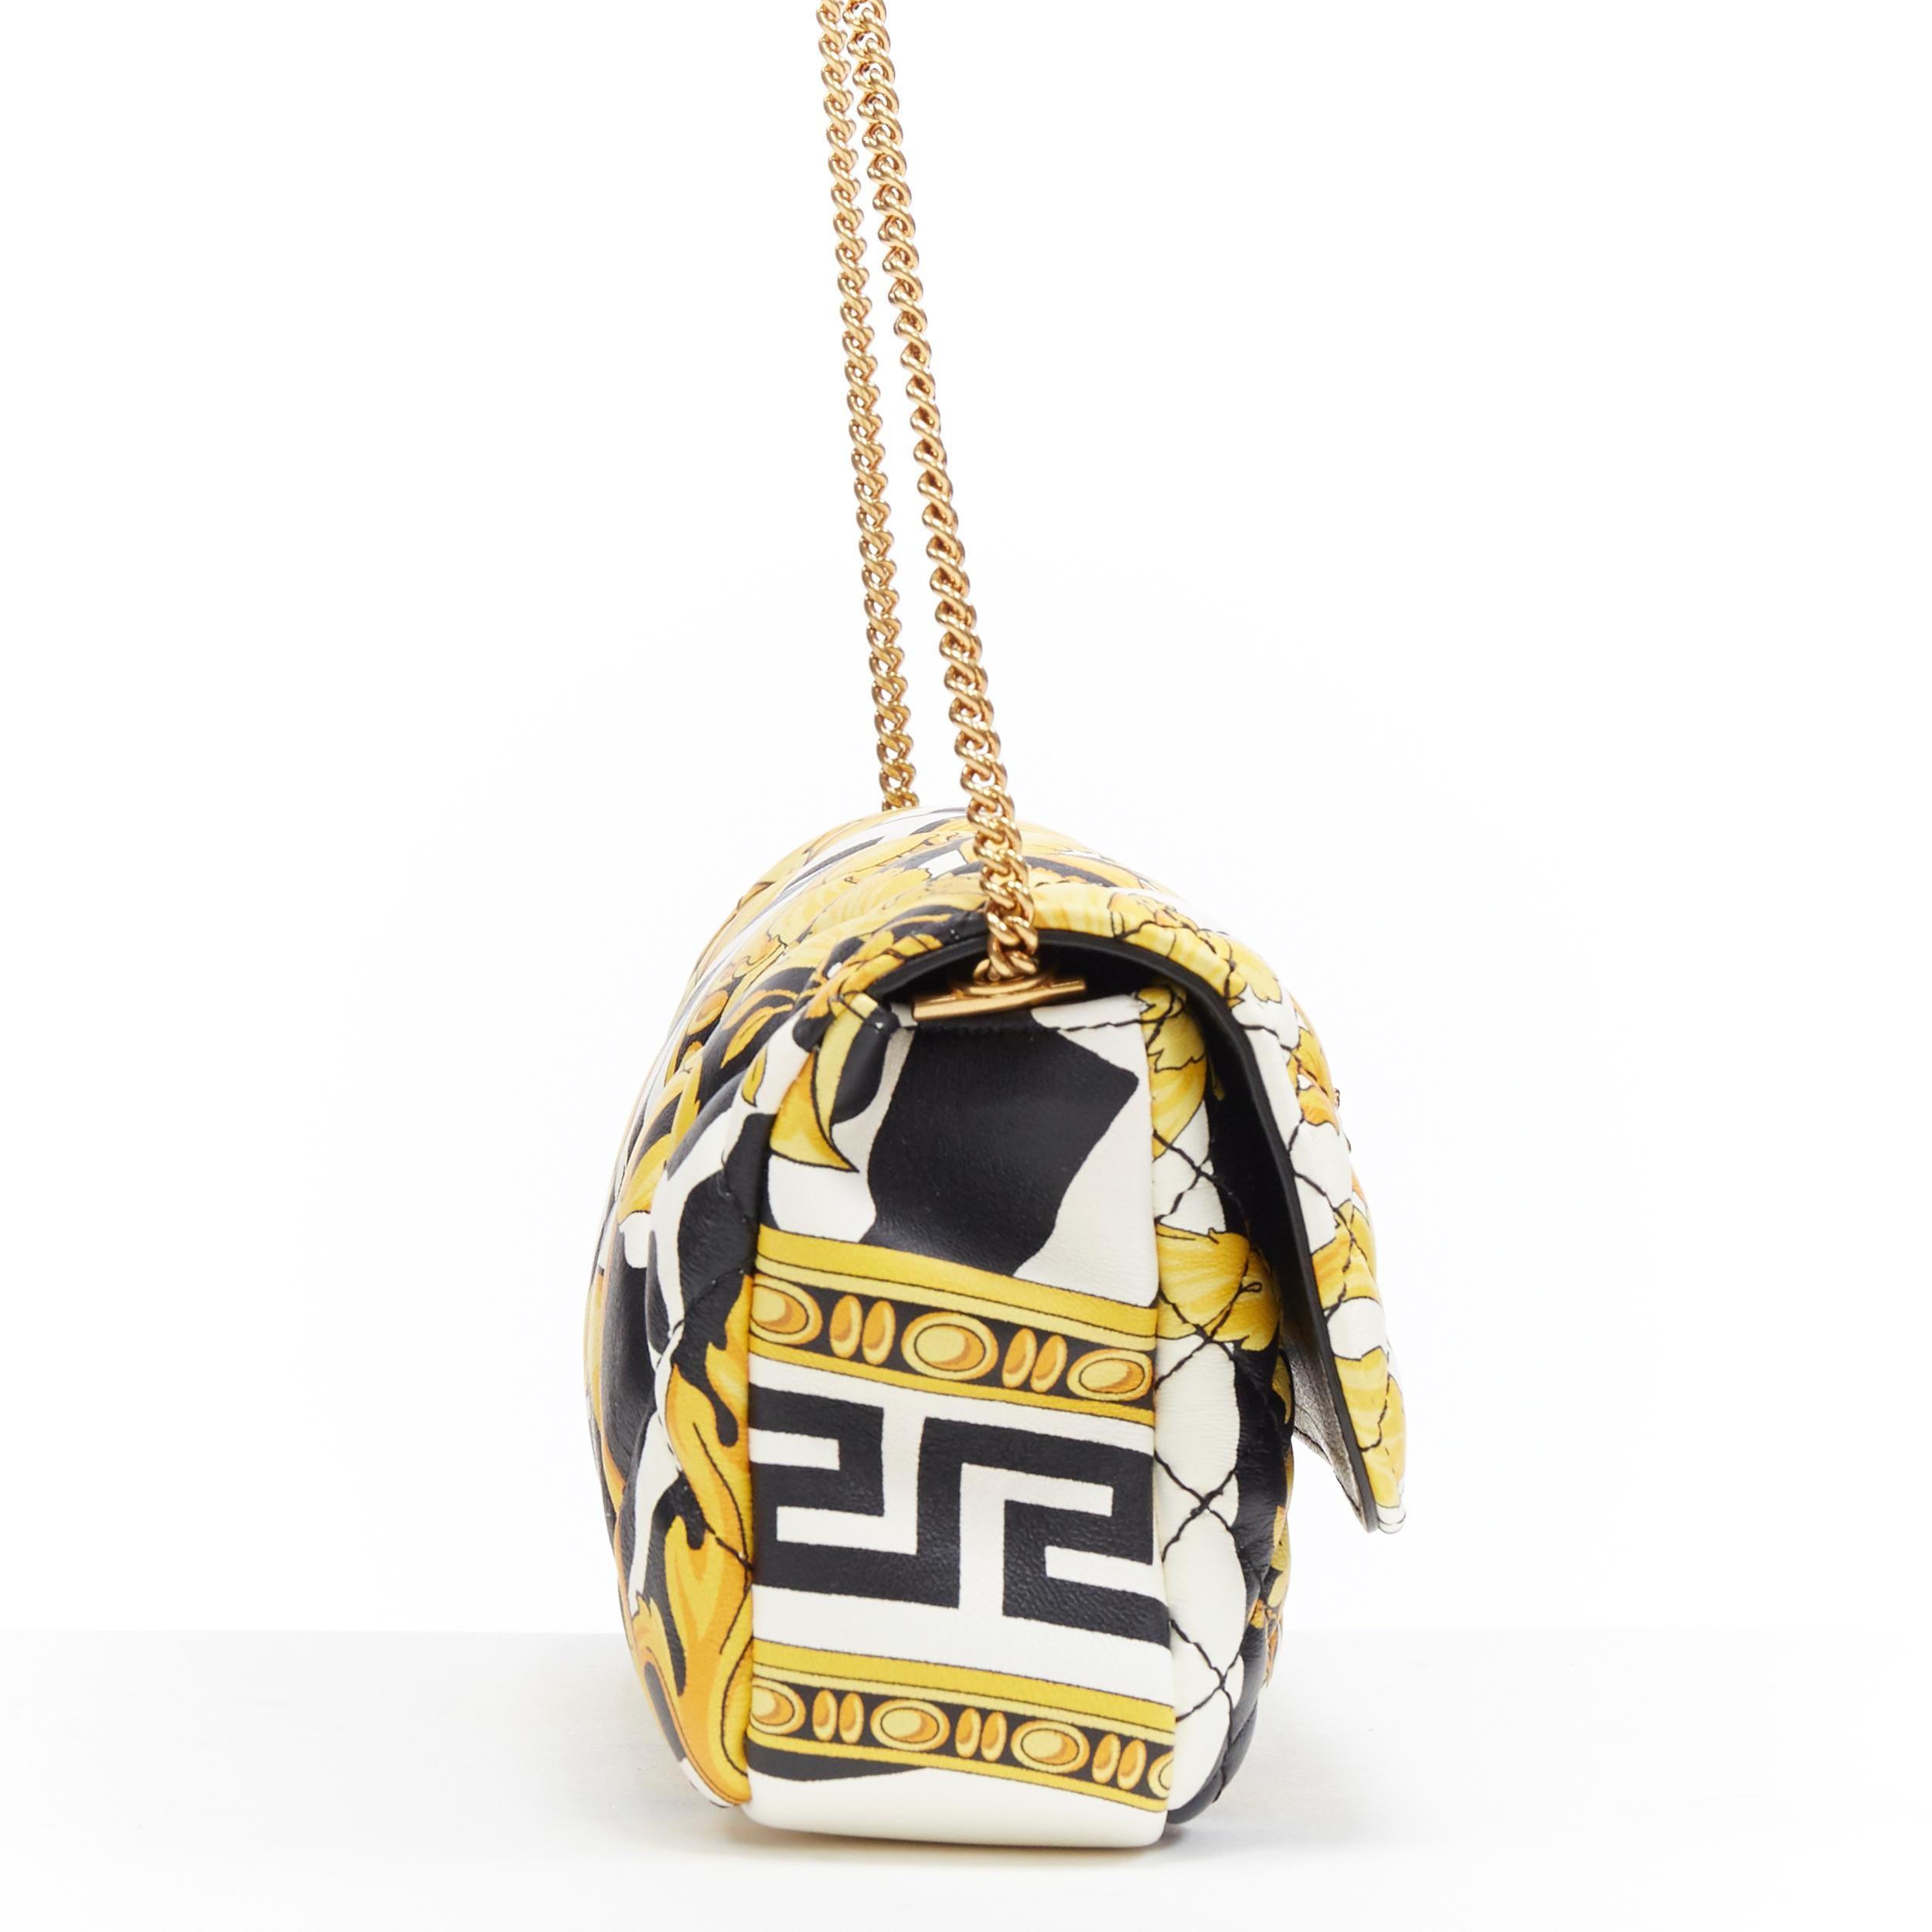 Women's new VERSACE AW19 black white Greca gold baroque print quilted leather Medusa bag